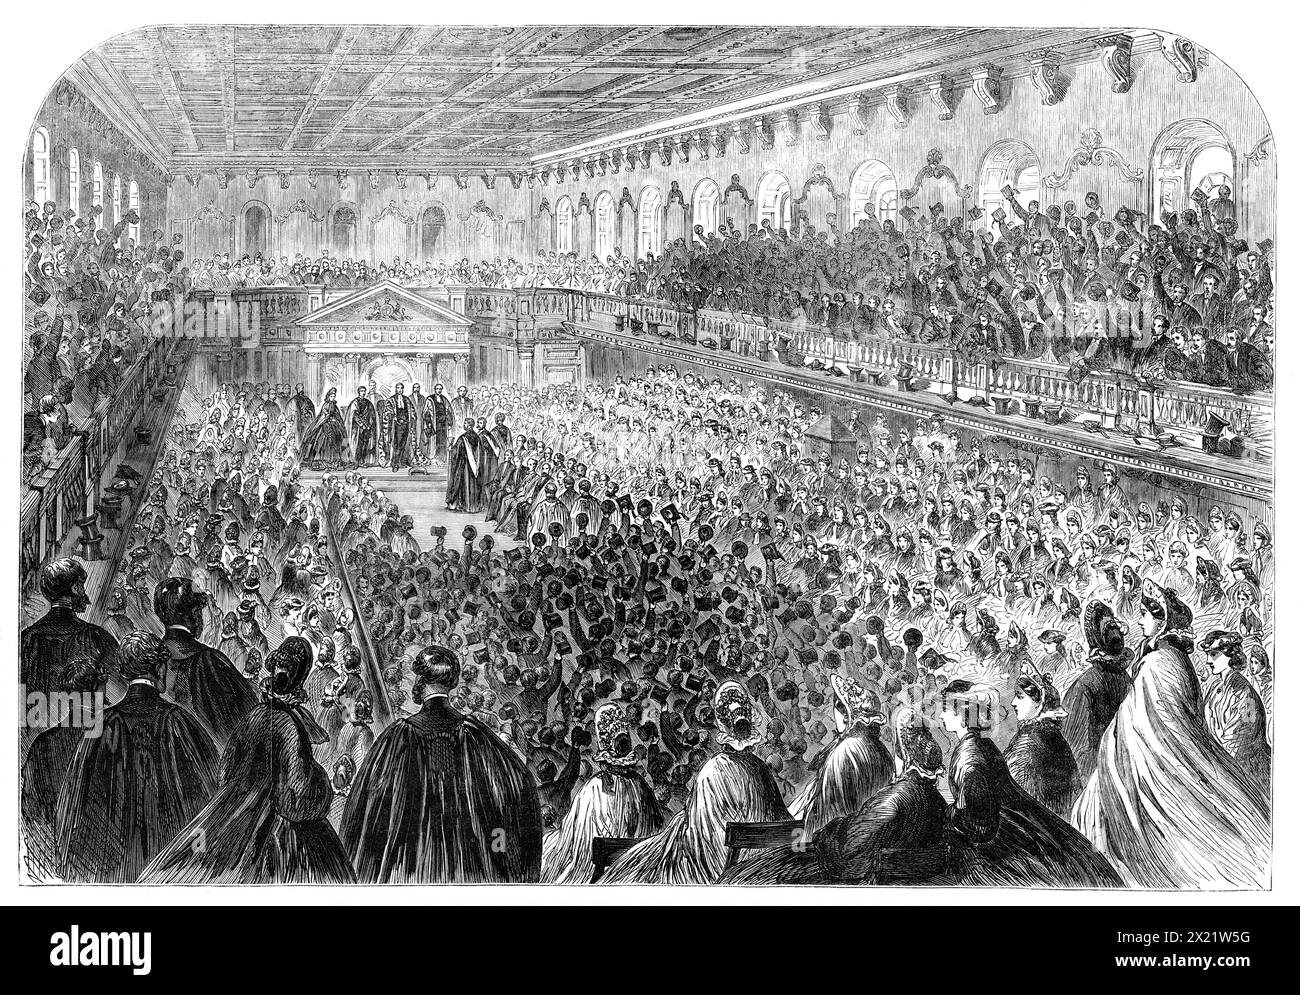 The Royal Visit to Cambridge - the Senate-House: &quot;Three Cheers for Denmark!&quot;, 1864. The Prince of Wales, (future King Edward VII) attends the conferring of degrees. 'The body of the hall and the galleries were, as usual, crowded with members of the University, and in the reserved seats were the distiguished visitors...Three cheers were given for Lord Palmerston and three hearty rounds of applause for the Prince and Princess...The Chancellor, accompanied by the Vice Chancellor and the Earl of Powis, took his seat upon the dais, and the Princess of Wales was conducted to the chair of s Stock Photo